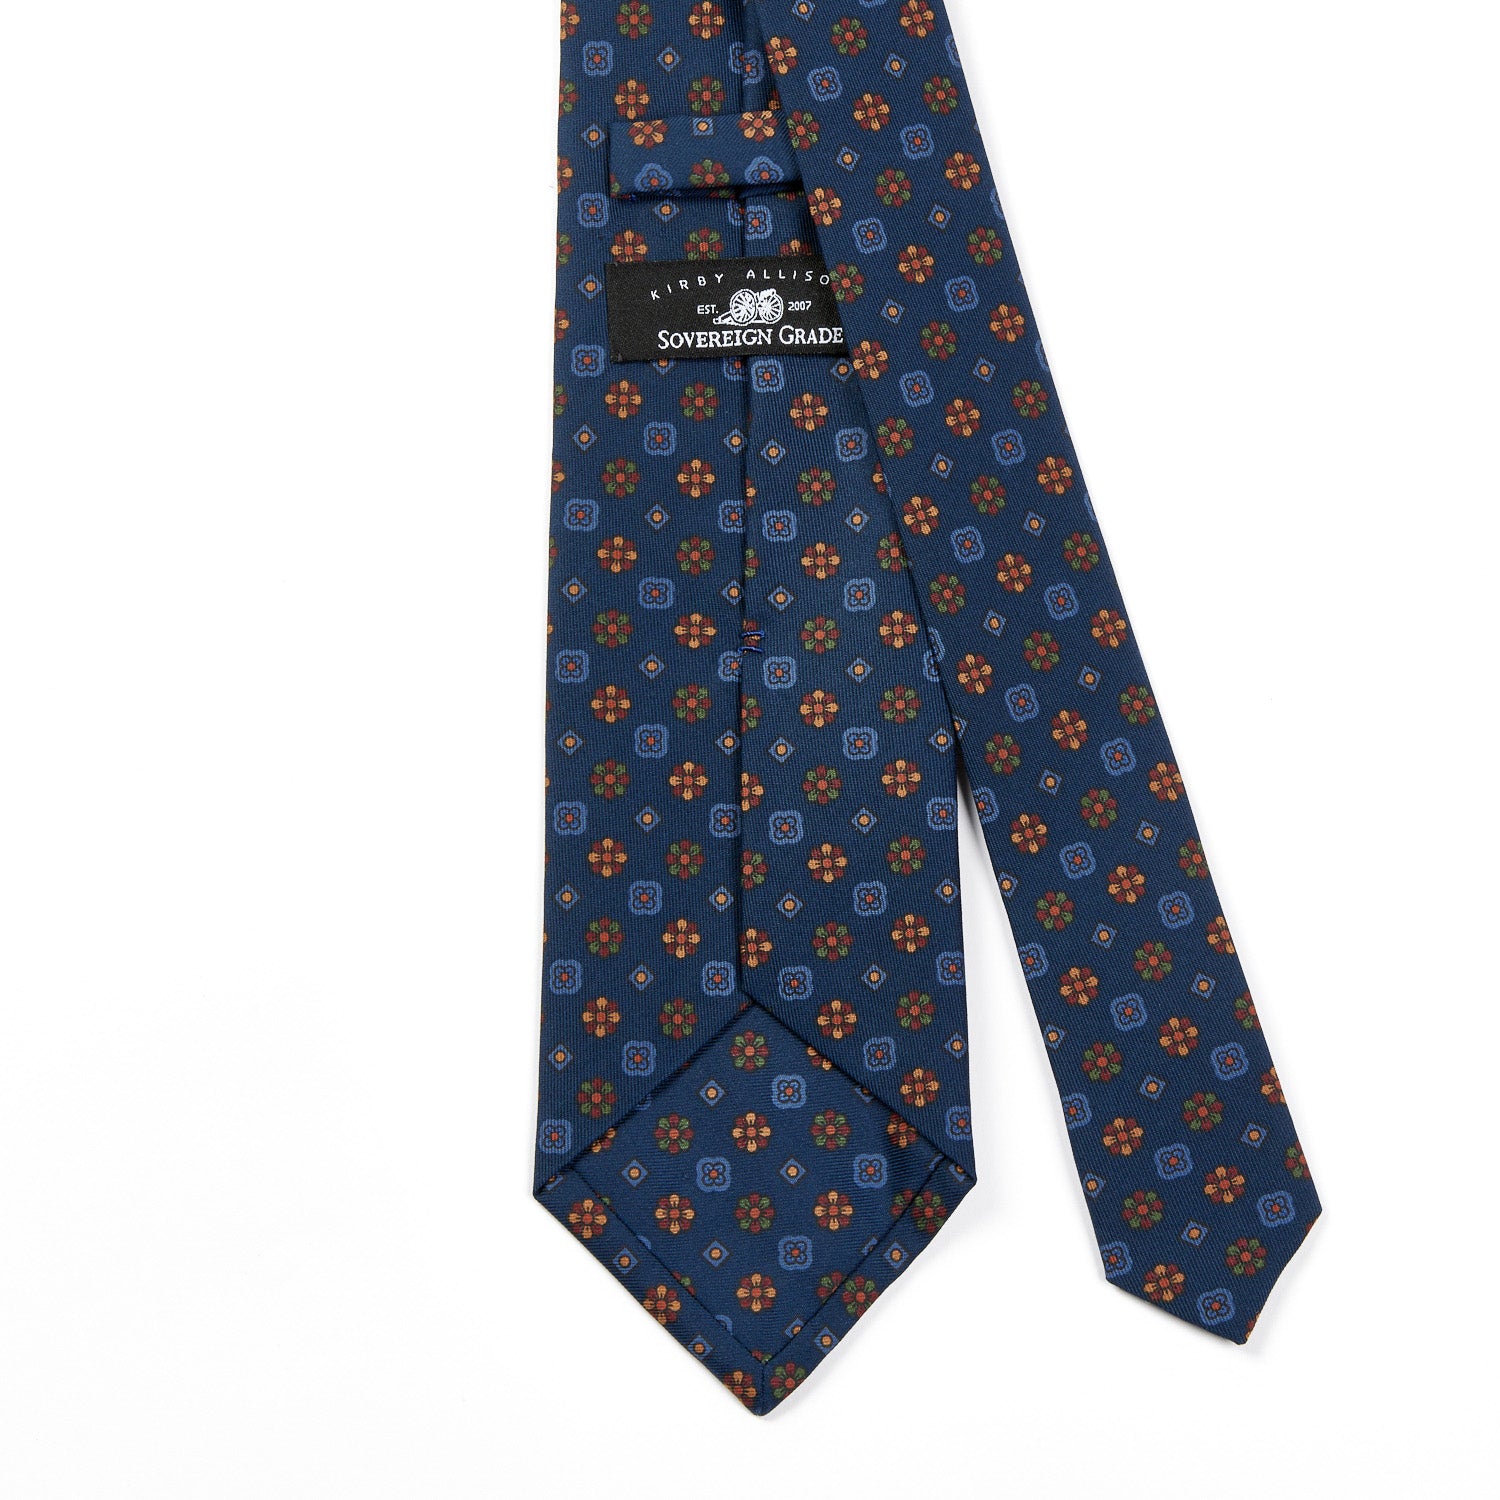 A Sovereign Grade Blue Mixed Floret Ancient Madder Tie from KirbyAllison.com with quality orange and blue flowers on it.